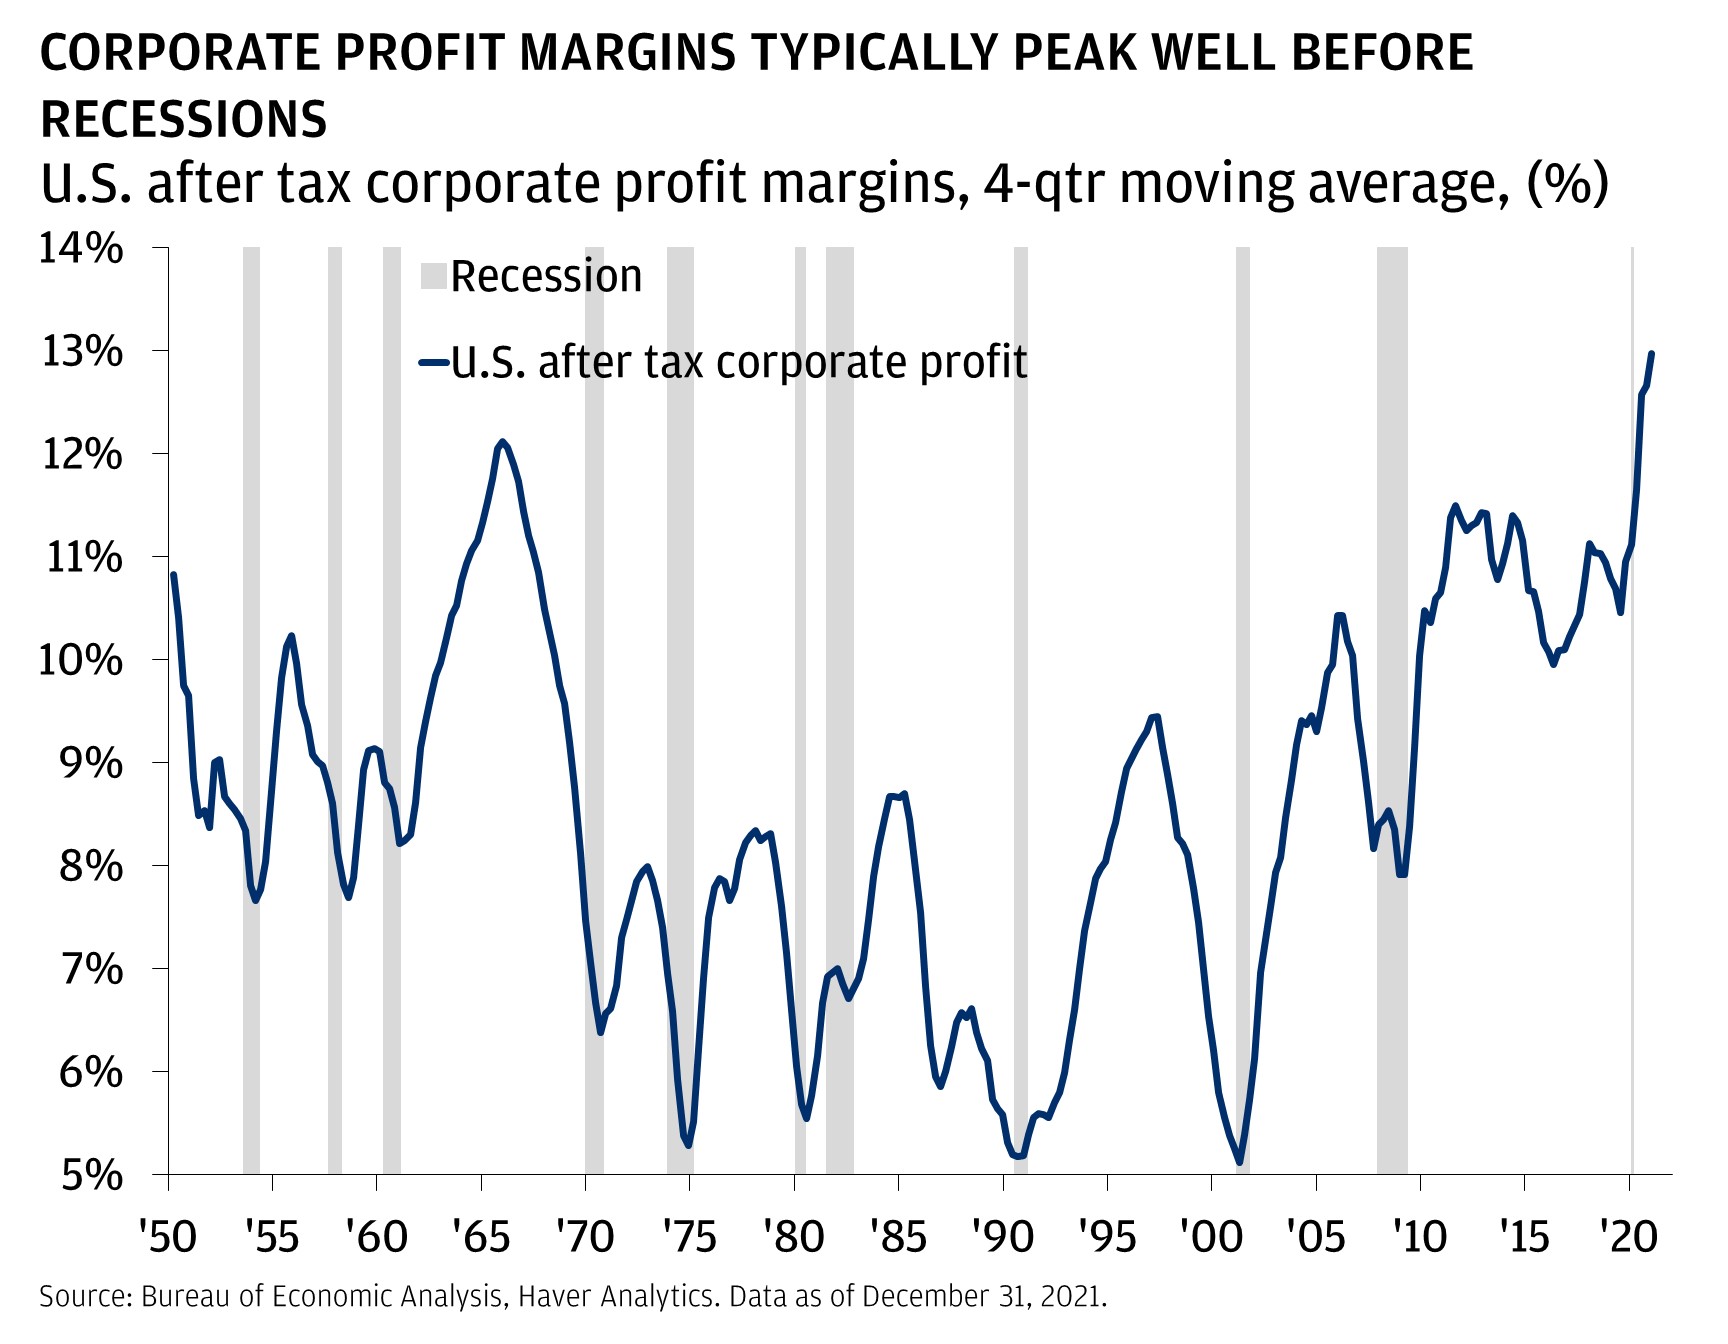 CORPORATE PROFIT MARGINS TYPICALLY PEAK WELL BEFORE RECESSIONS. This chart shows the 4-quarter moving average of U.S. after- tax corporate profit margins and recession bars over the period of March 31, 1950, to December 31, 2021.